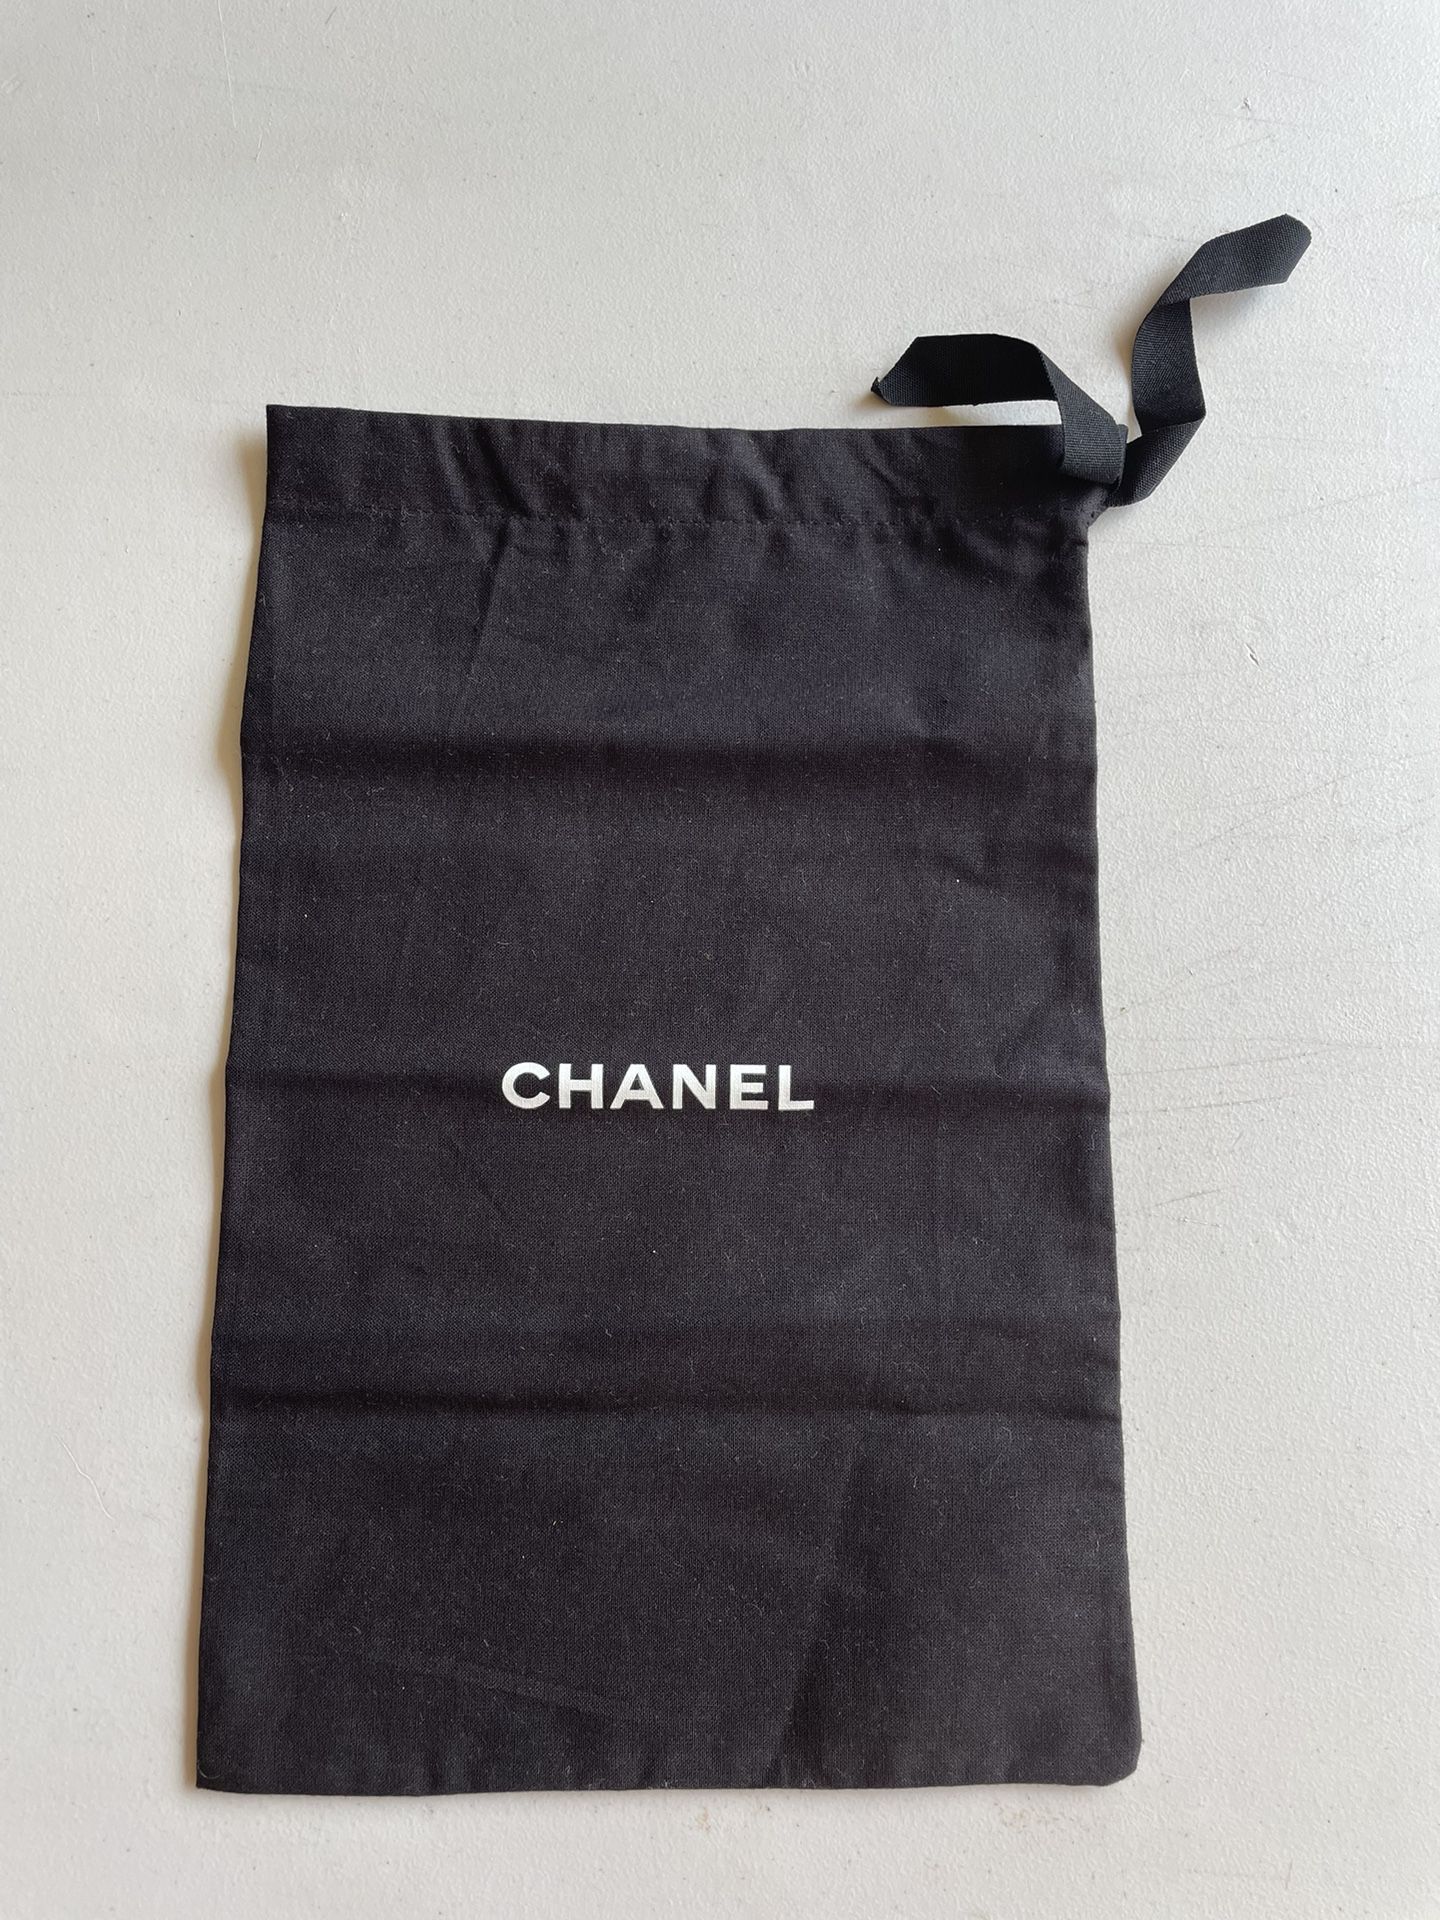 Chanel Black Dust Bag Travel Case Protective Cover Clutch Storage 13”x8”  Original for Sale in Niles, MI - OfferUp